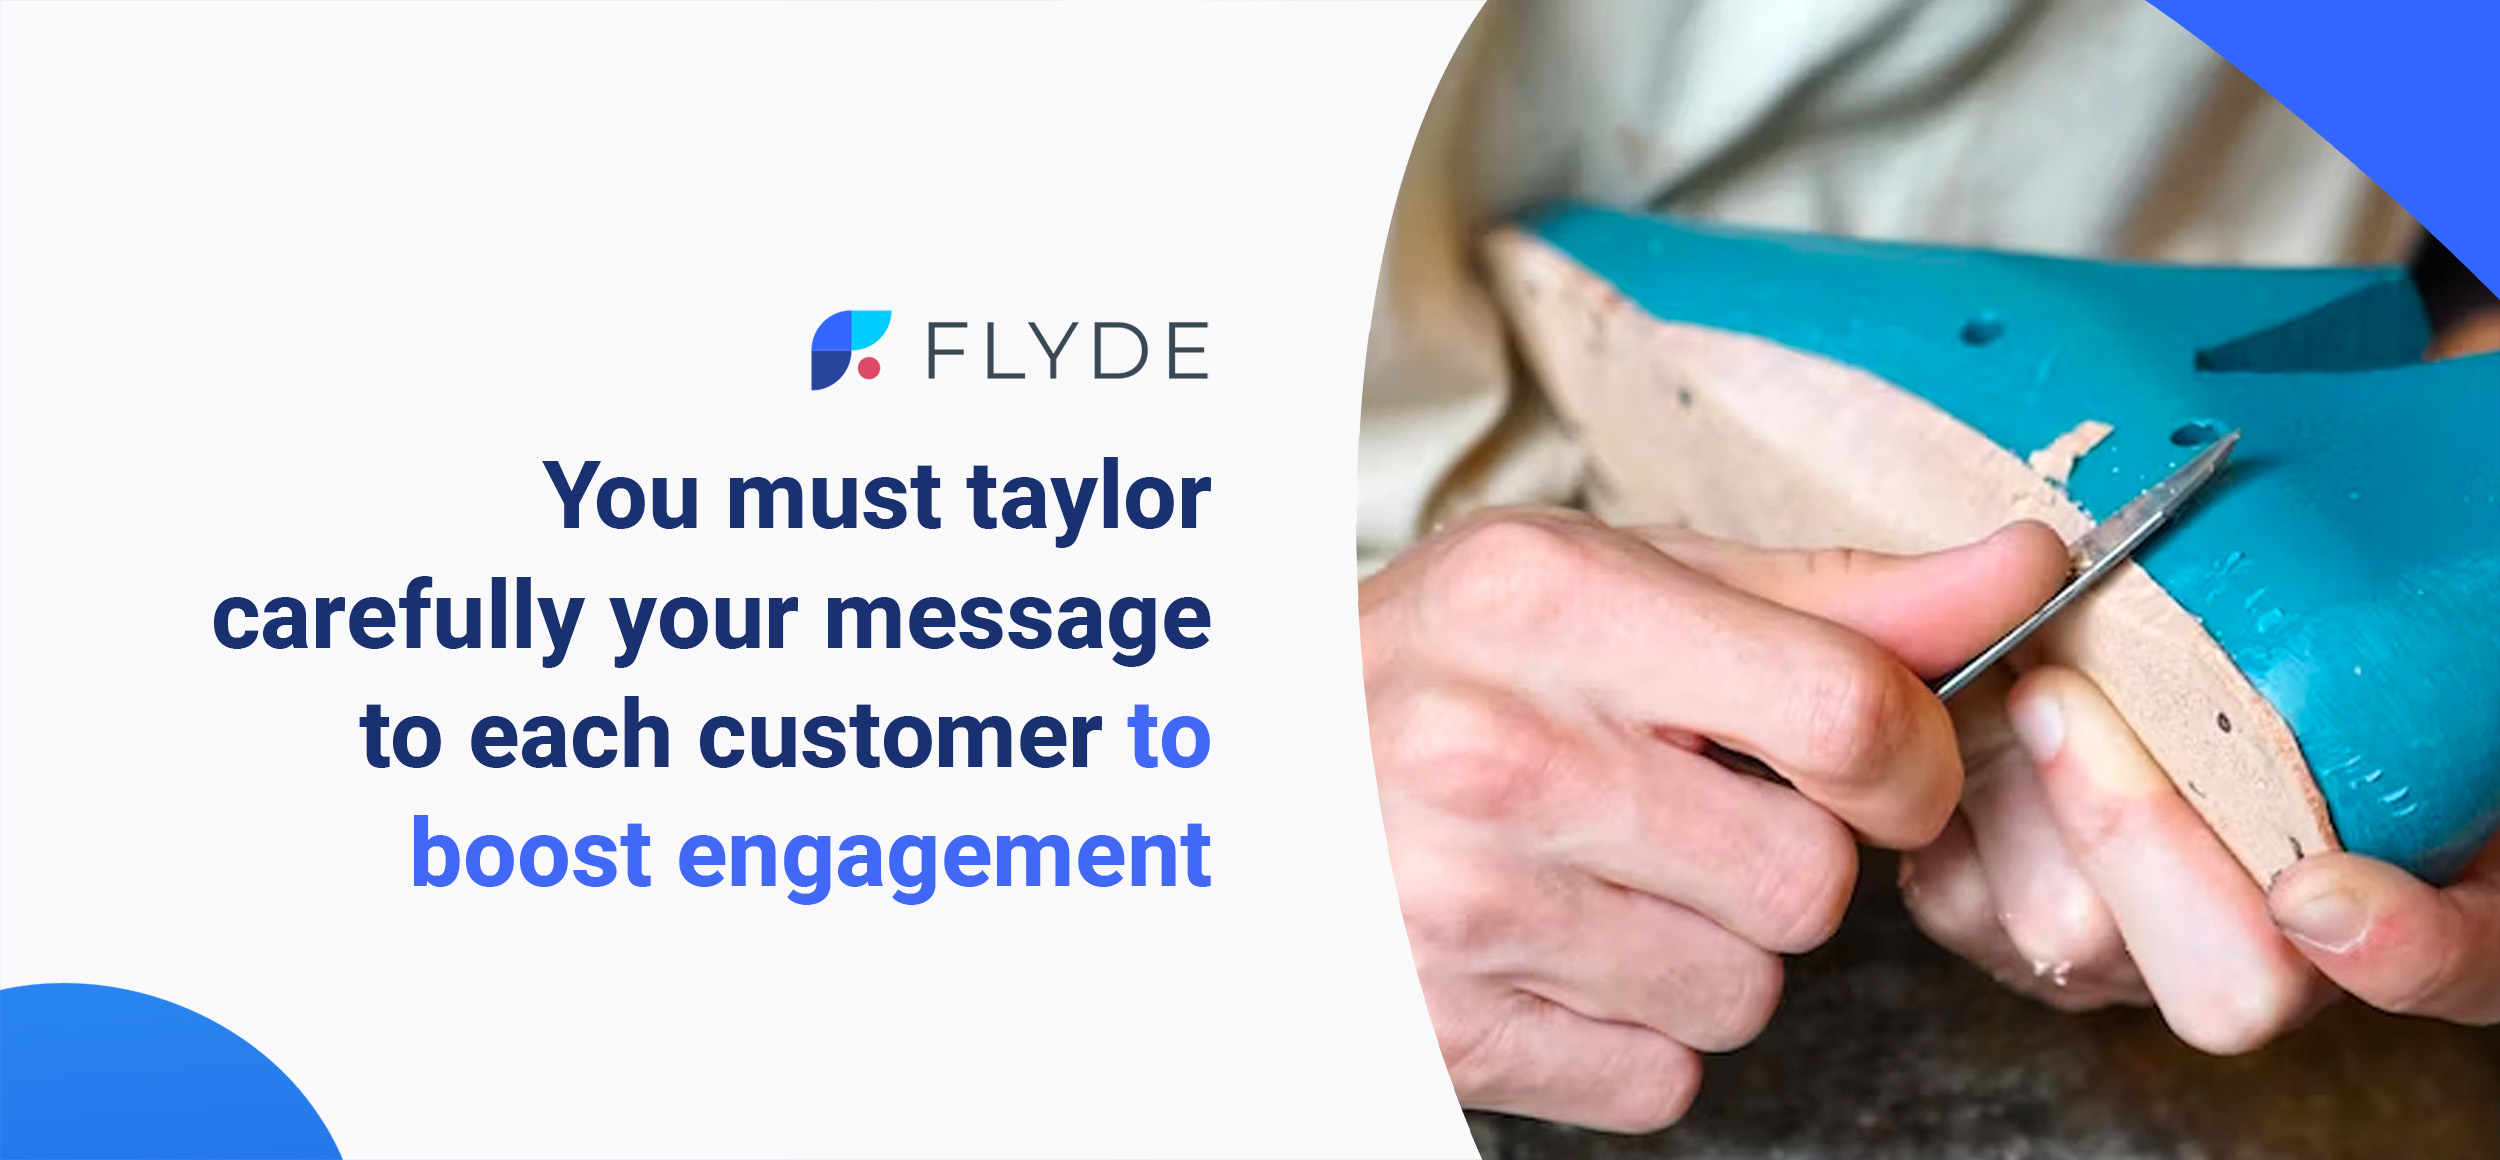 You must taylor carefully your message to each customer to boost engagement